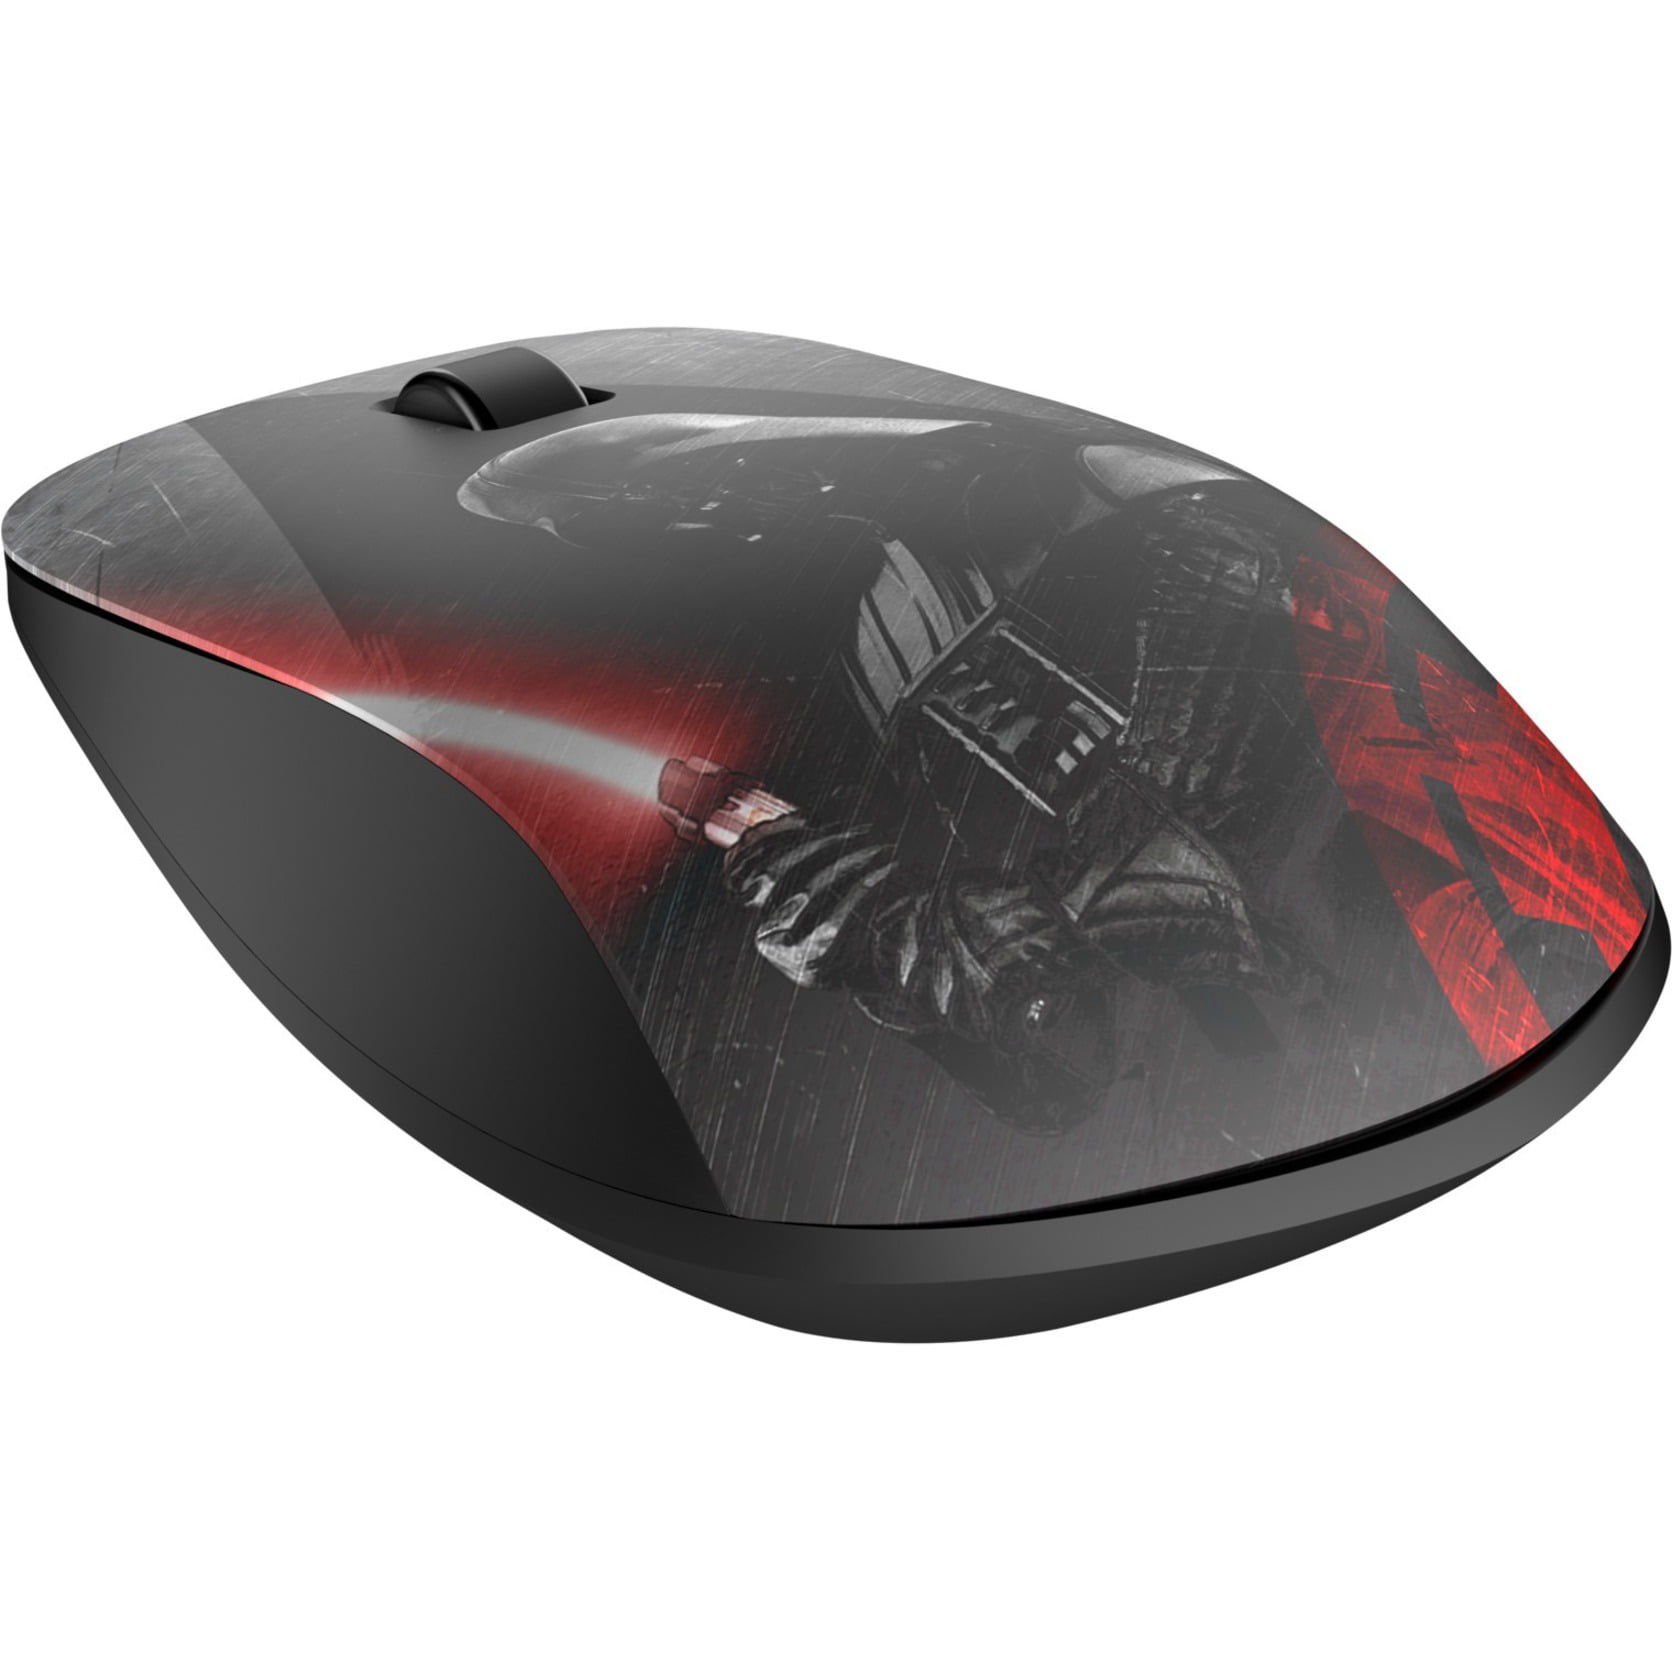 Catholic prepare to see HP Z4000 Star Wars Special Edition Wireless Mouse - Walmart.com